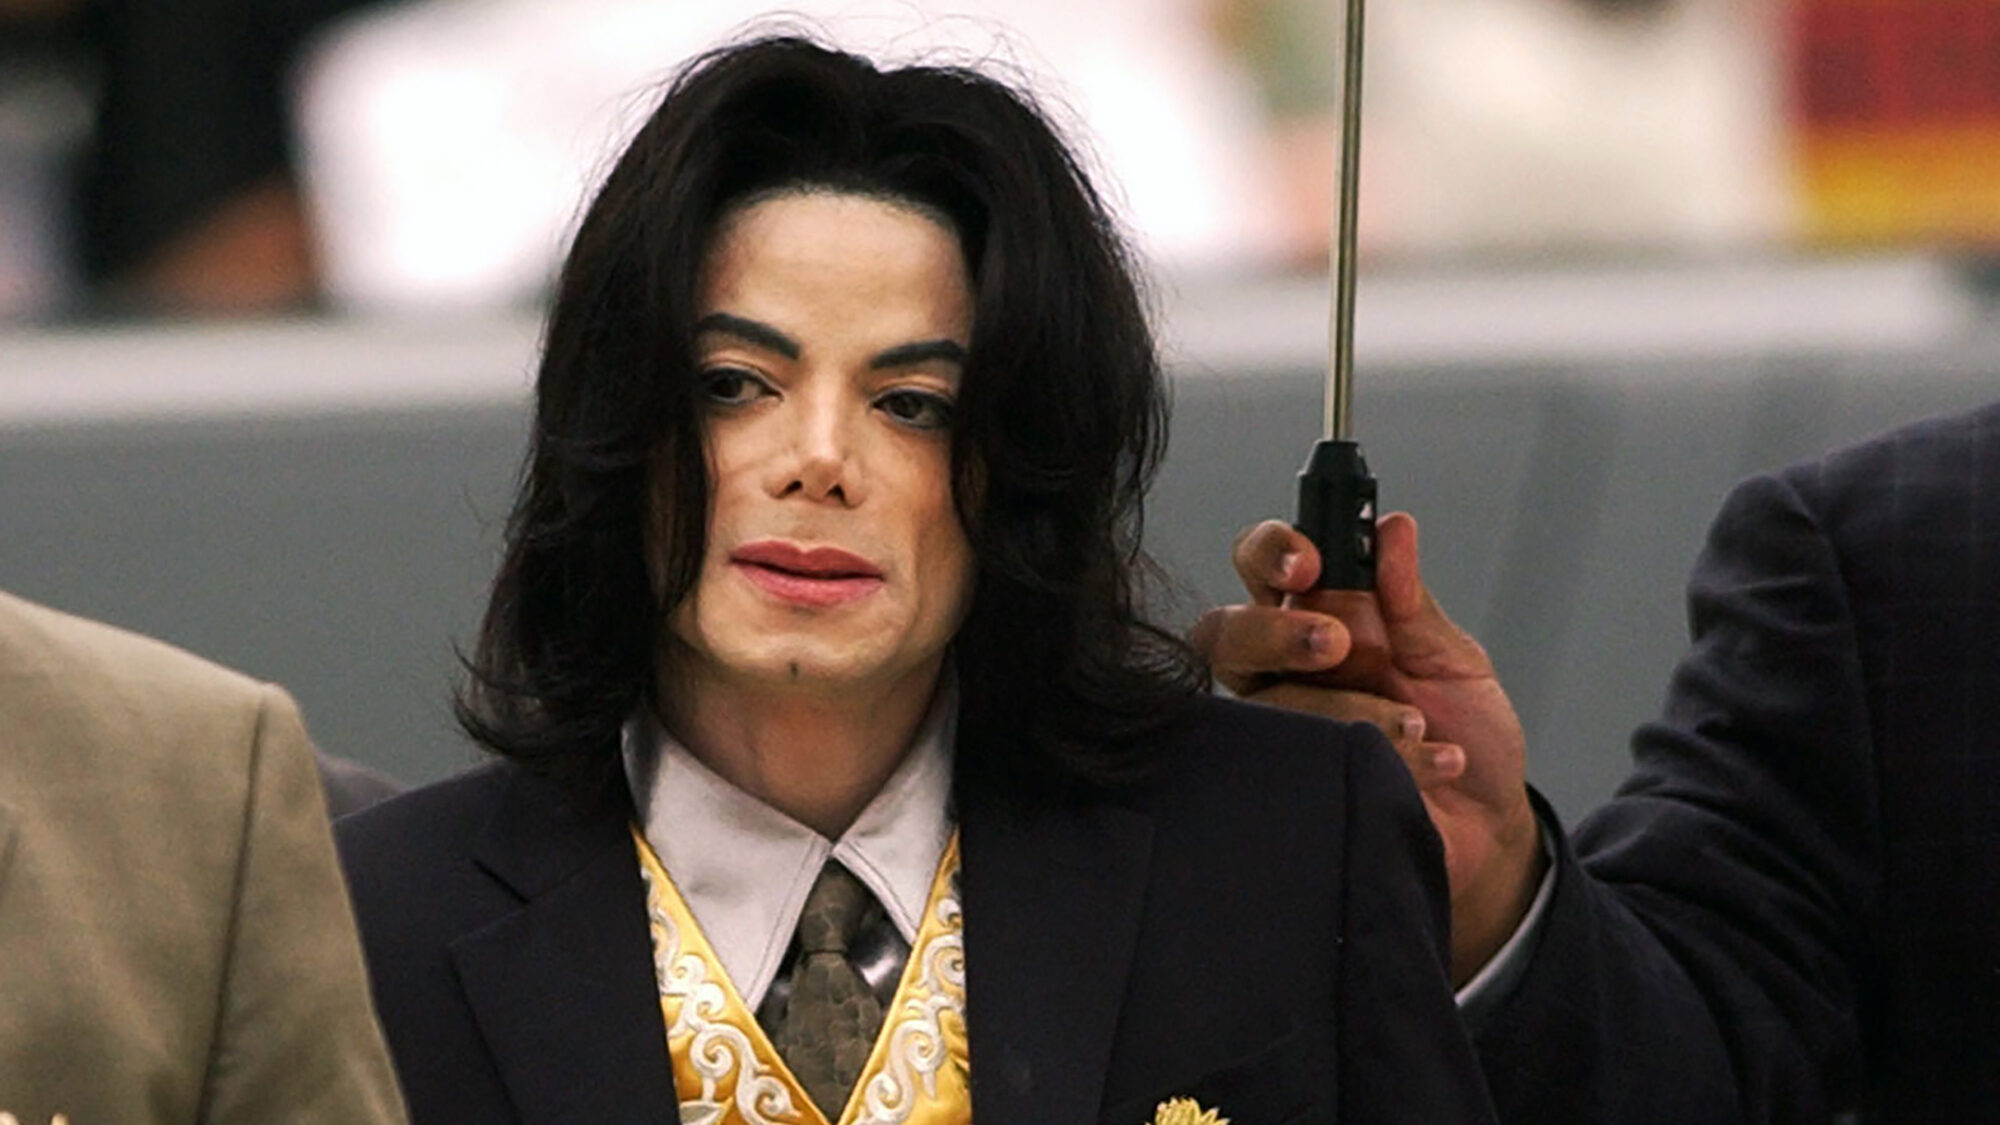 Michael Jackson arrives at the Santa Barbara County Courthouse for his child molestation trial in S...